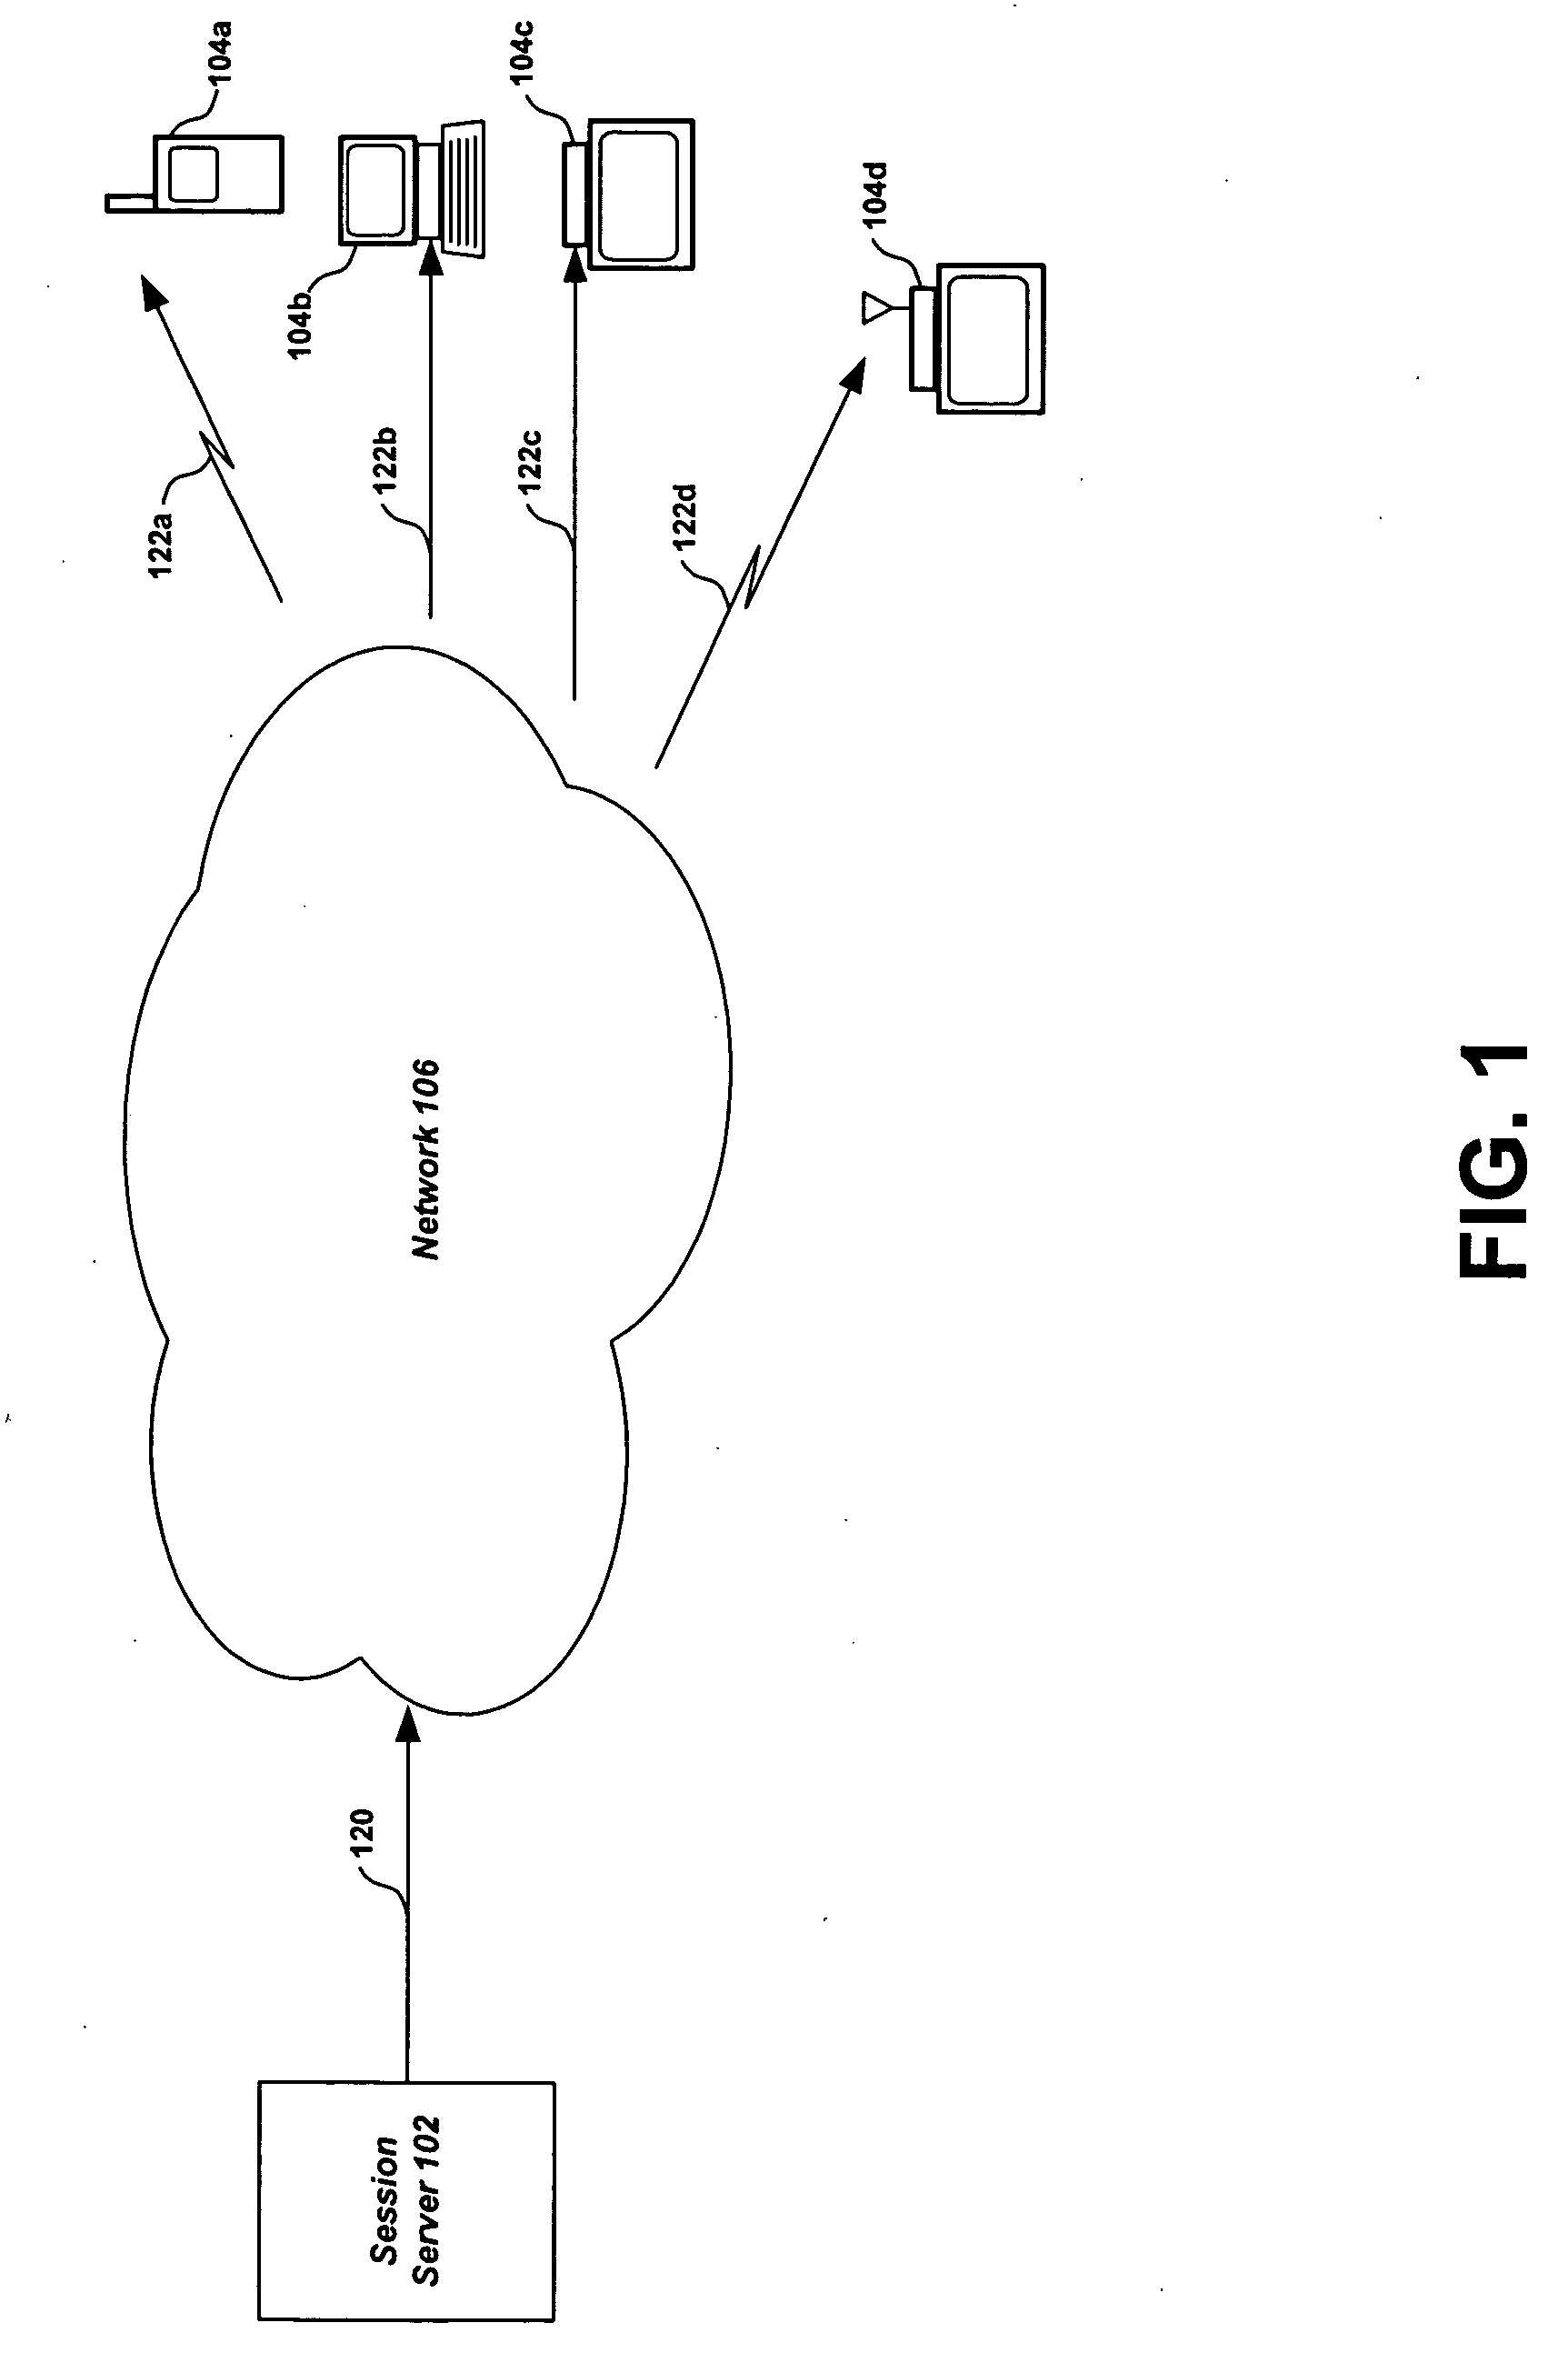 Transmission and reception of session packets